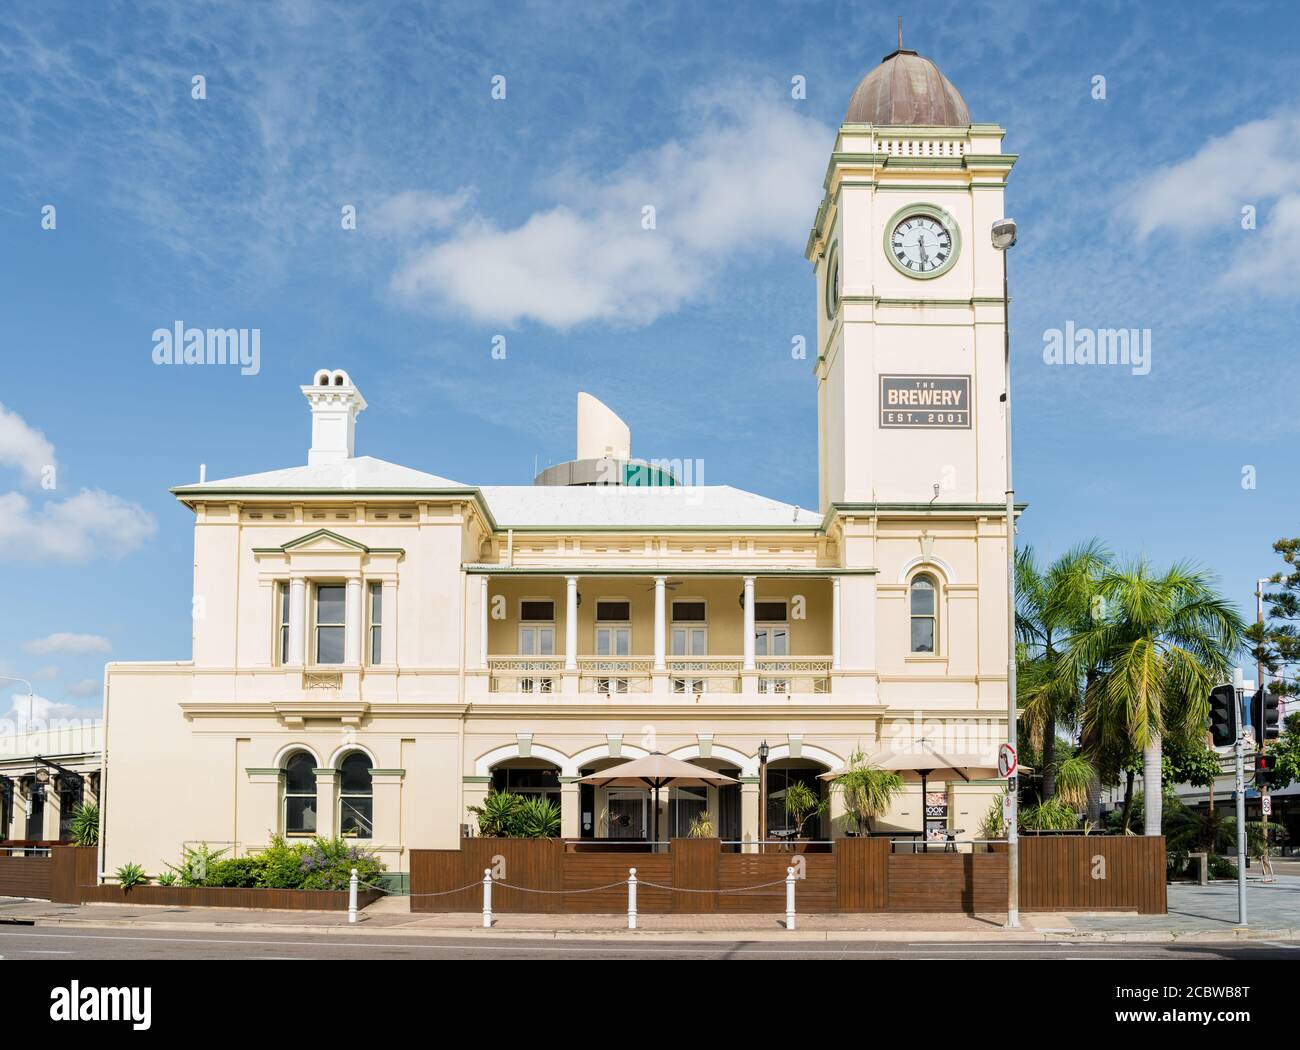 The original Townsville Post Office is now The Brewery in Townsville, North Queensland, Australia Stock Photo